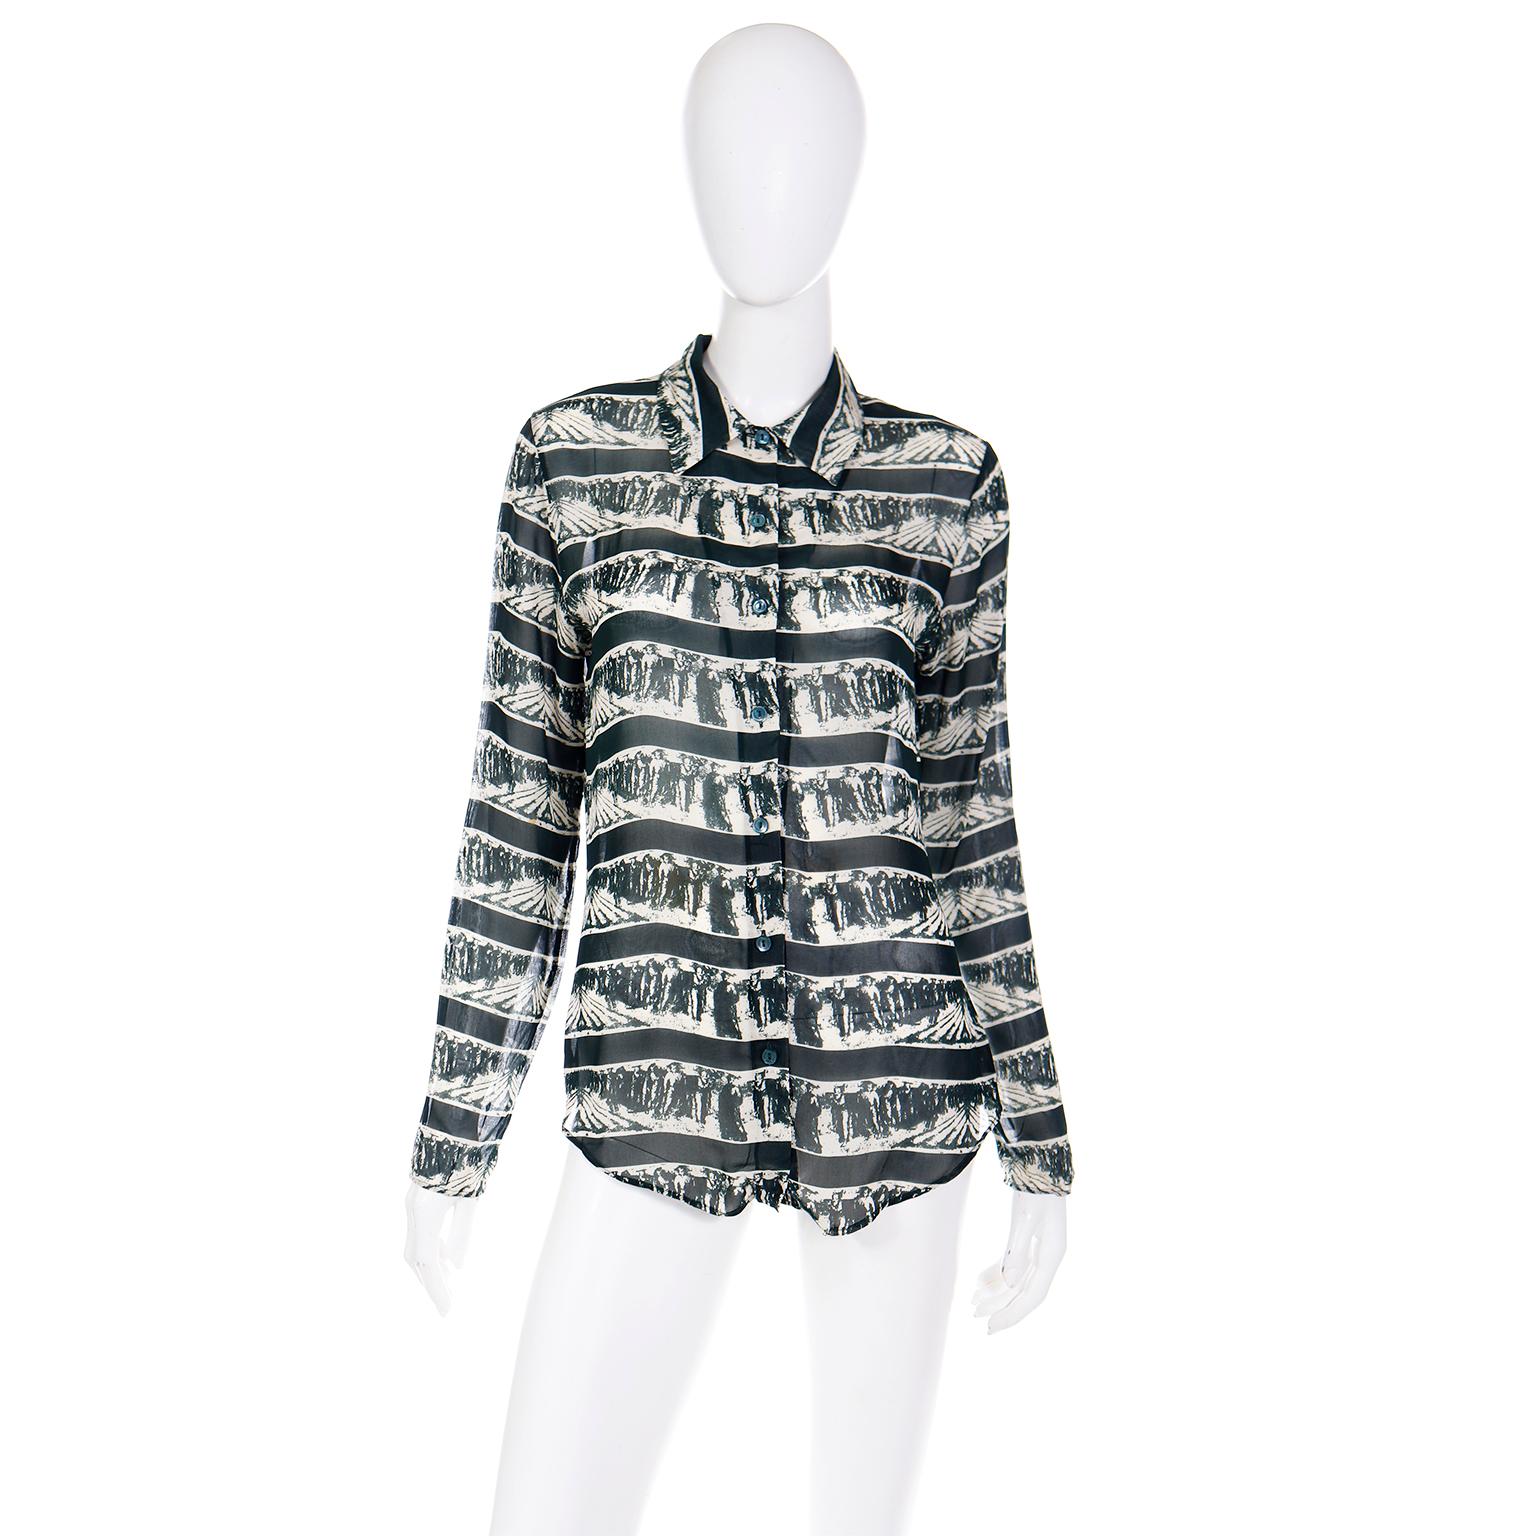 This is a really fun vintage 1990's Jean Paul Gaultier shirt in a great vintage novelty graphic print. This deadstock, pointed collar blouse is in a sheer forest green and ivory rayon with pearlescent green round buttons down the center front. The